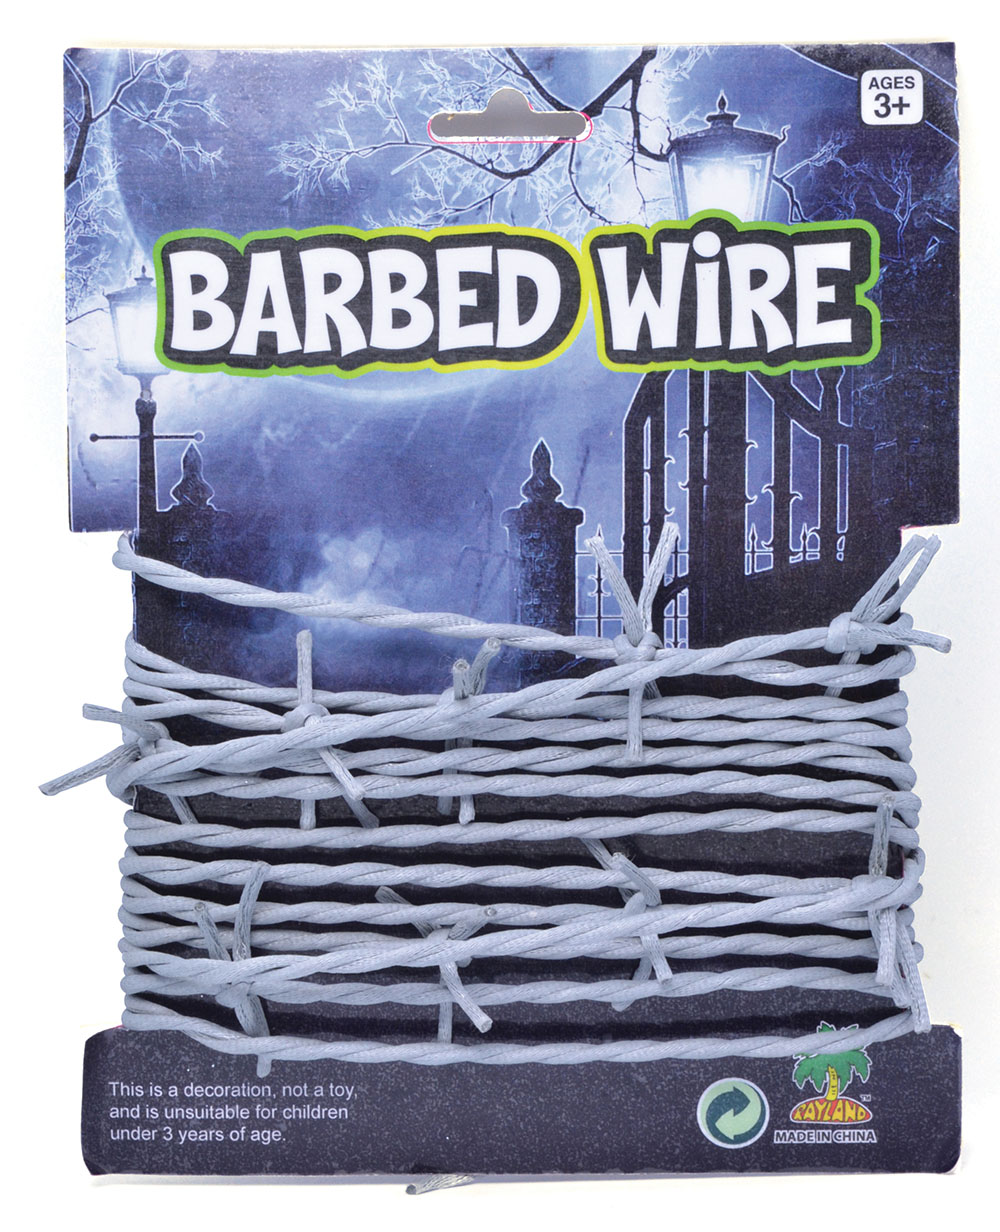 Barbed Wire. Carded